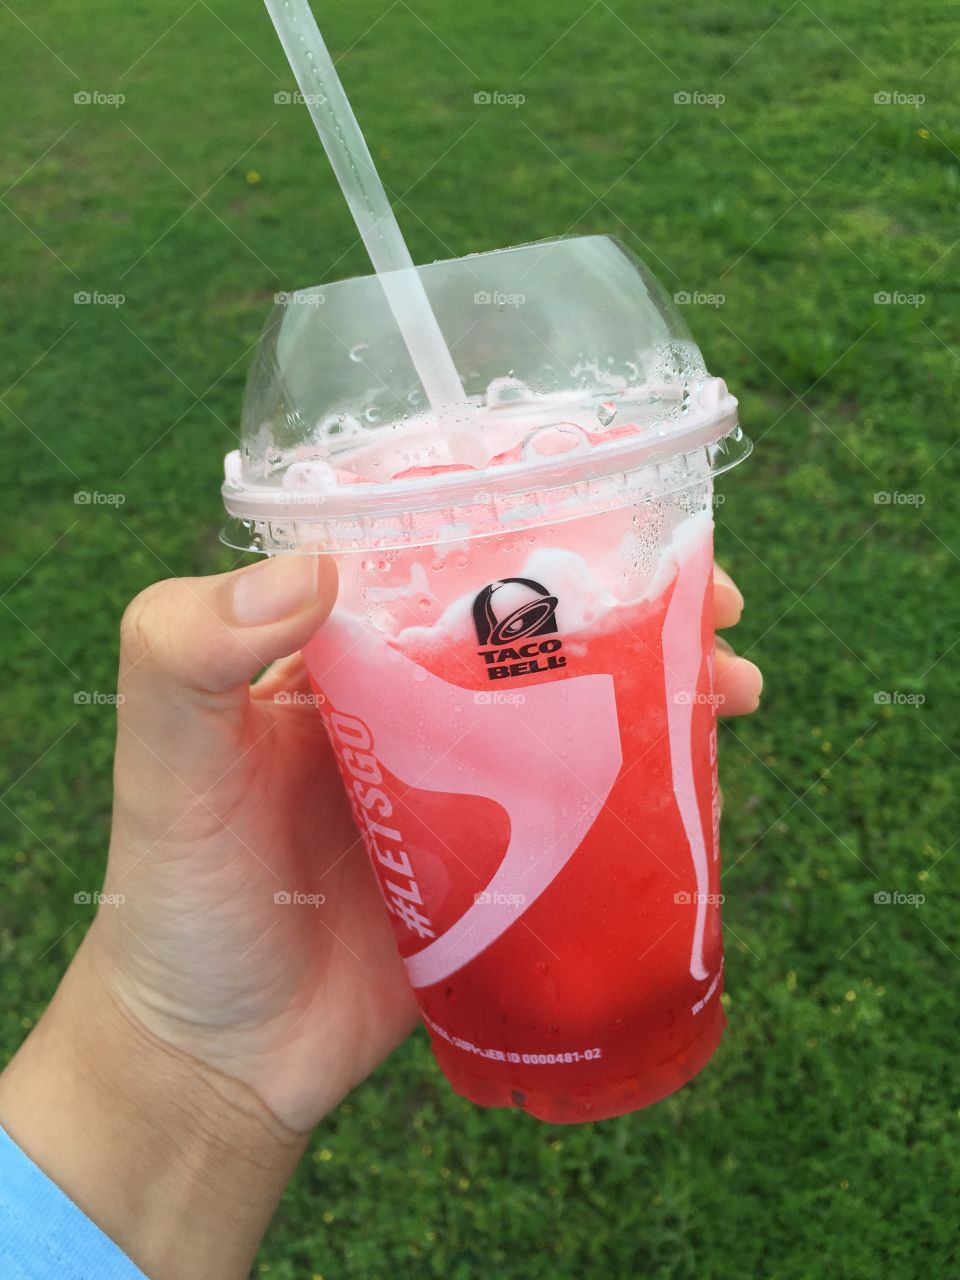 Taco Bell Starburst Freeze. Delicious drink